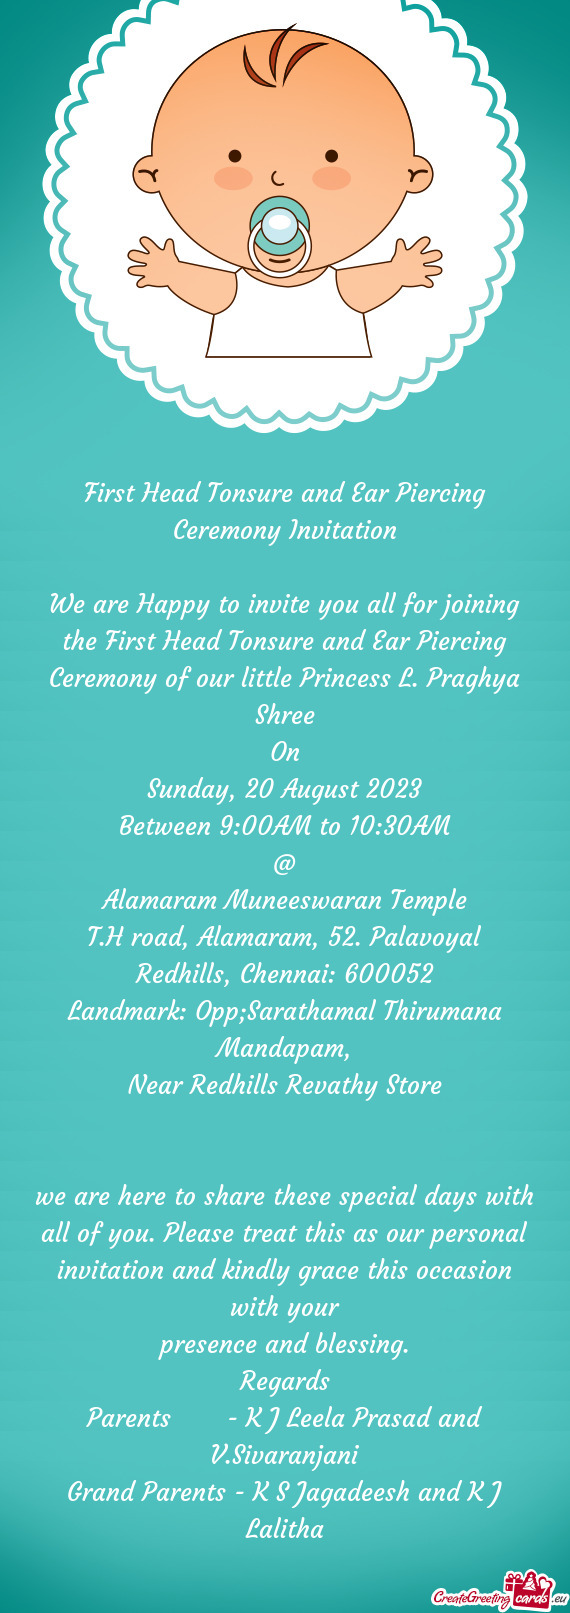 We are Happy to invite you all for joining the First Head Tonsure and Ear Piercing Ceremony of our l